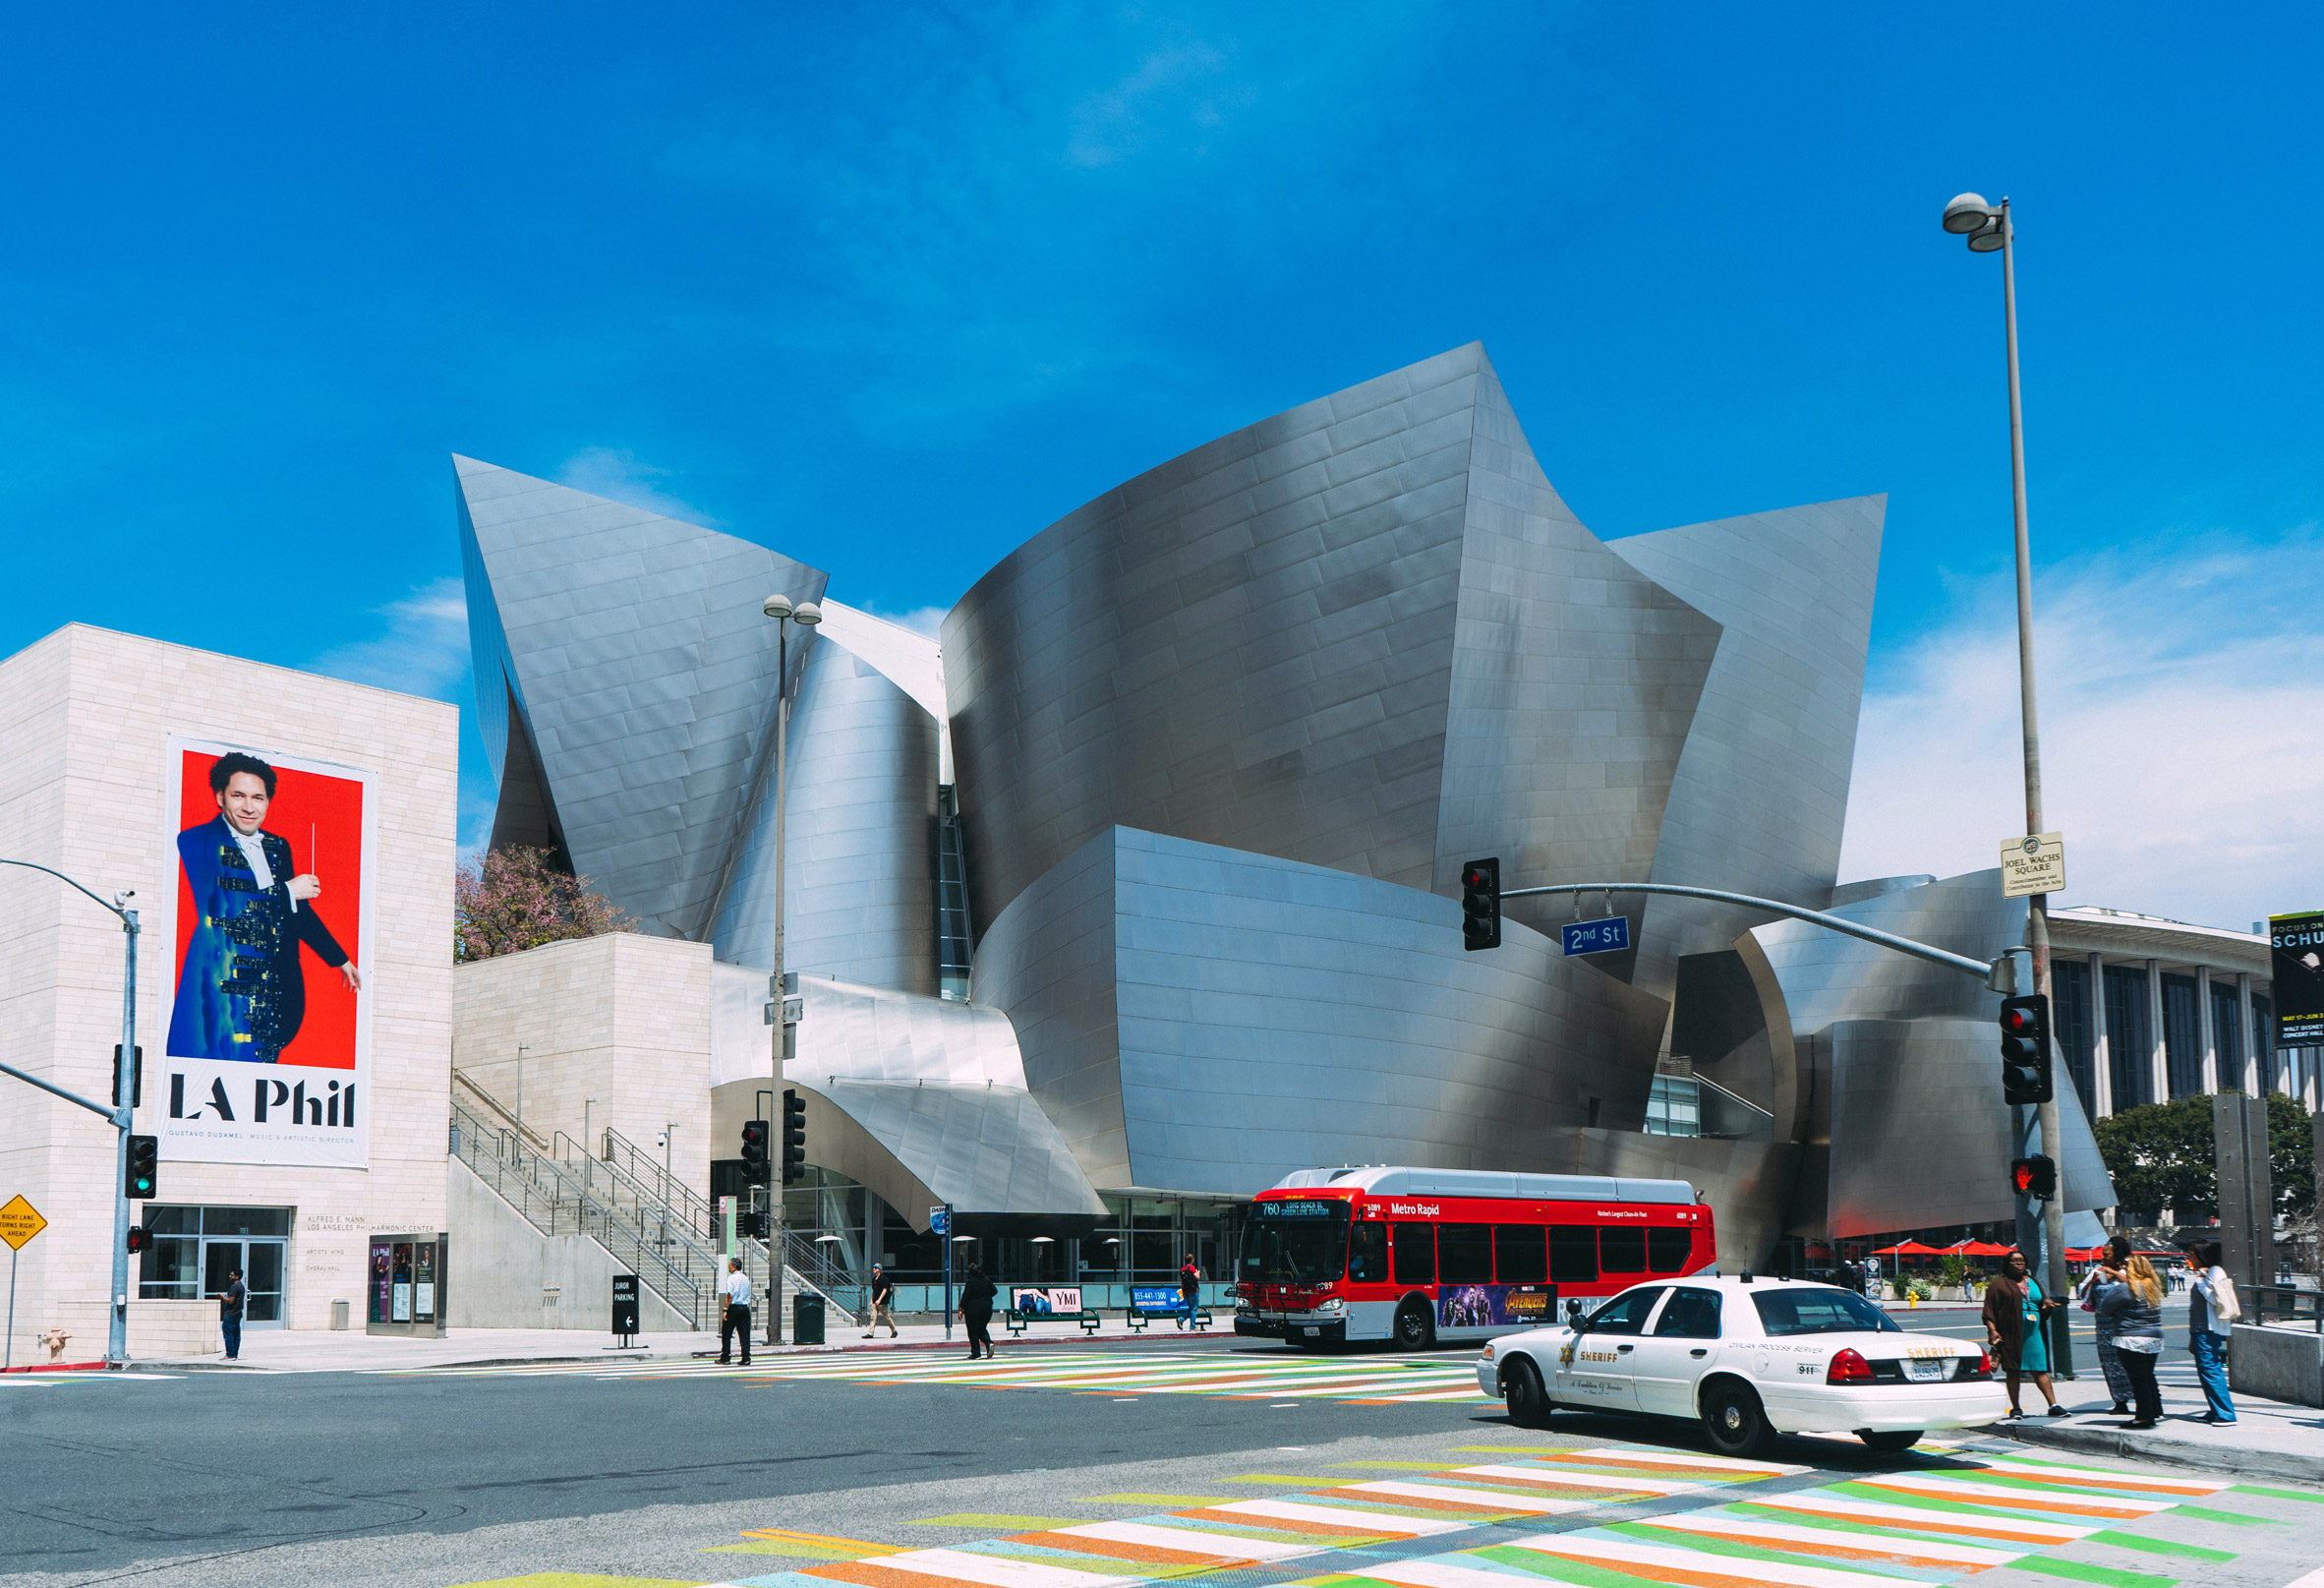 Exterior of Walt Disney Concert Hall by Frank Gehry